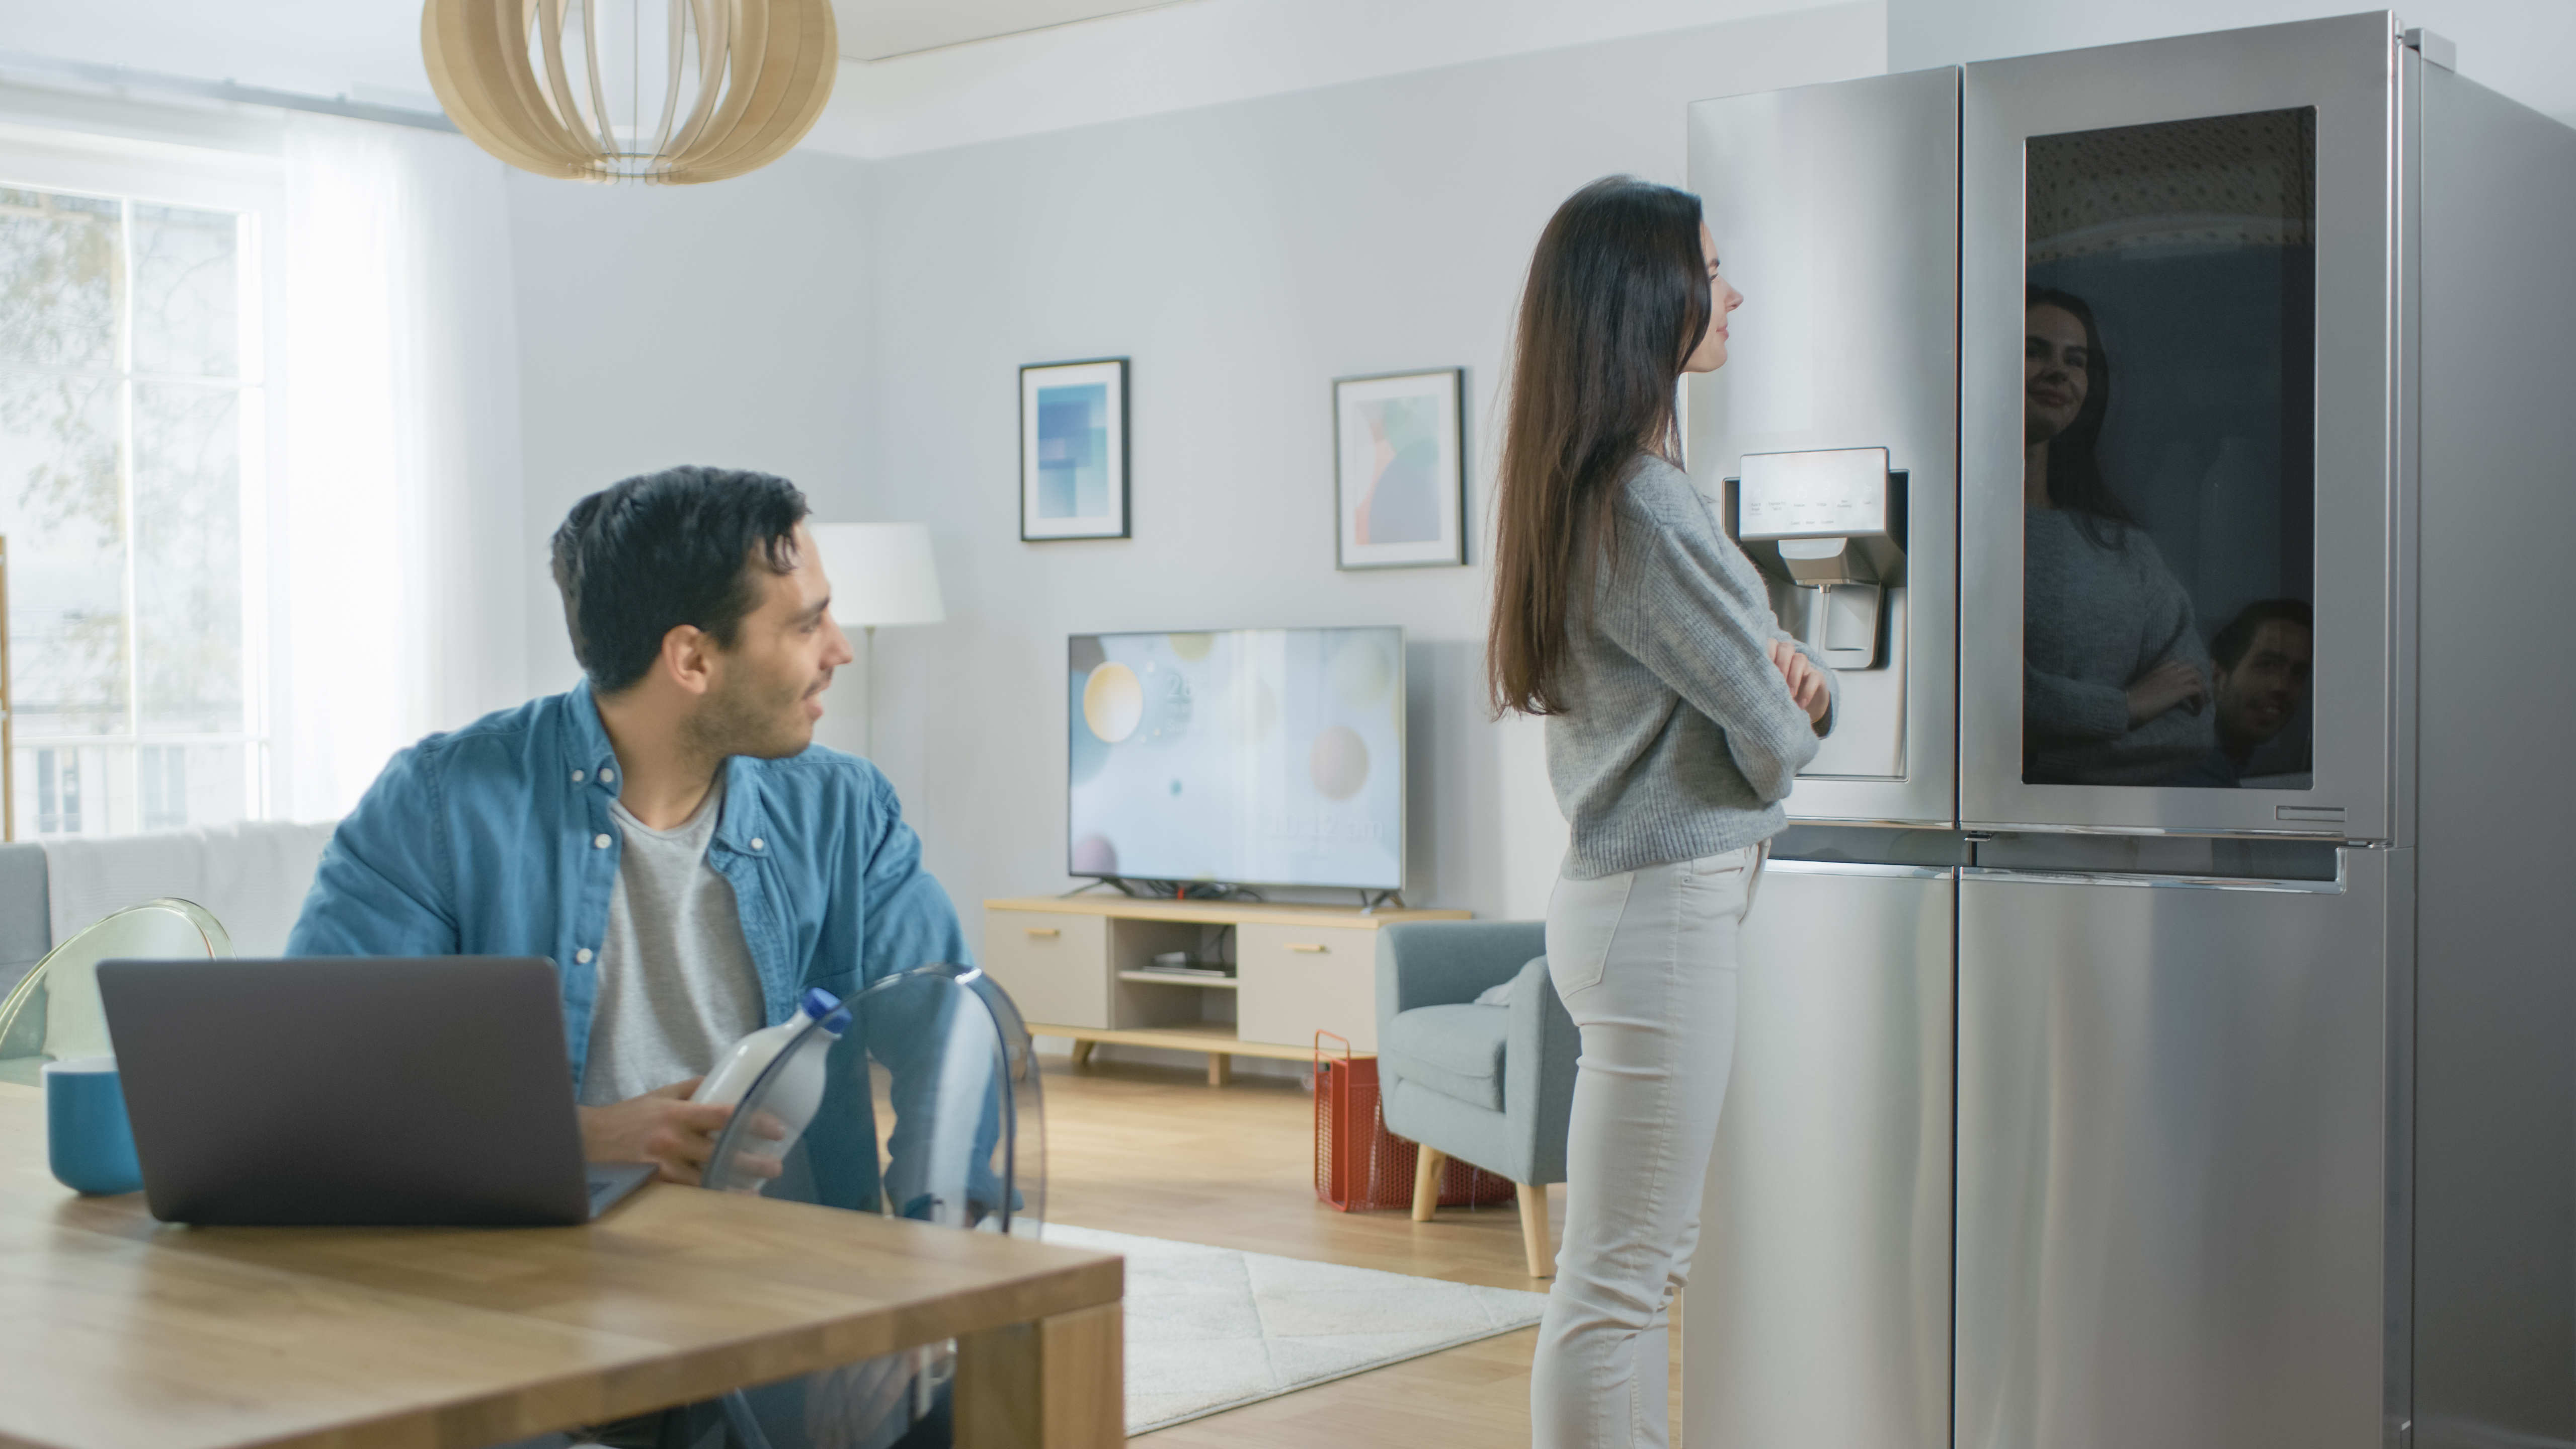 Man and woman looking at a refrigerator in their kitchen